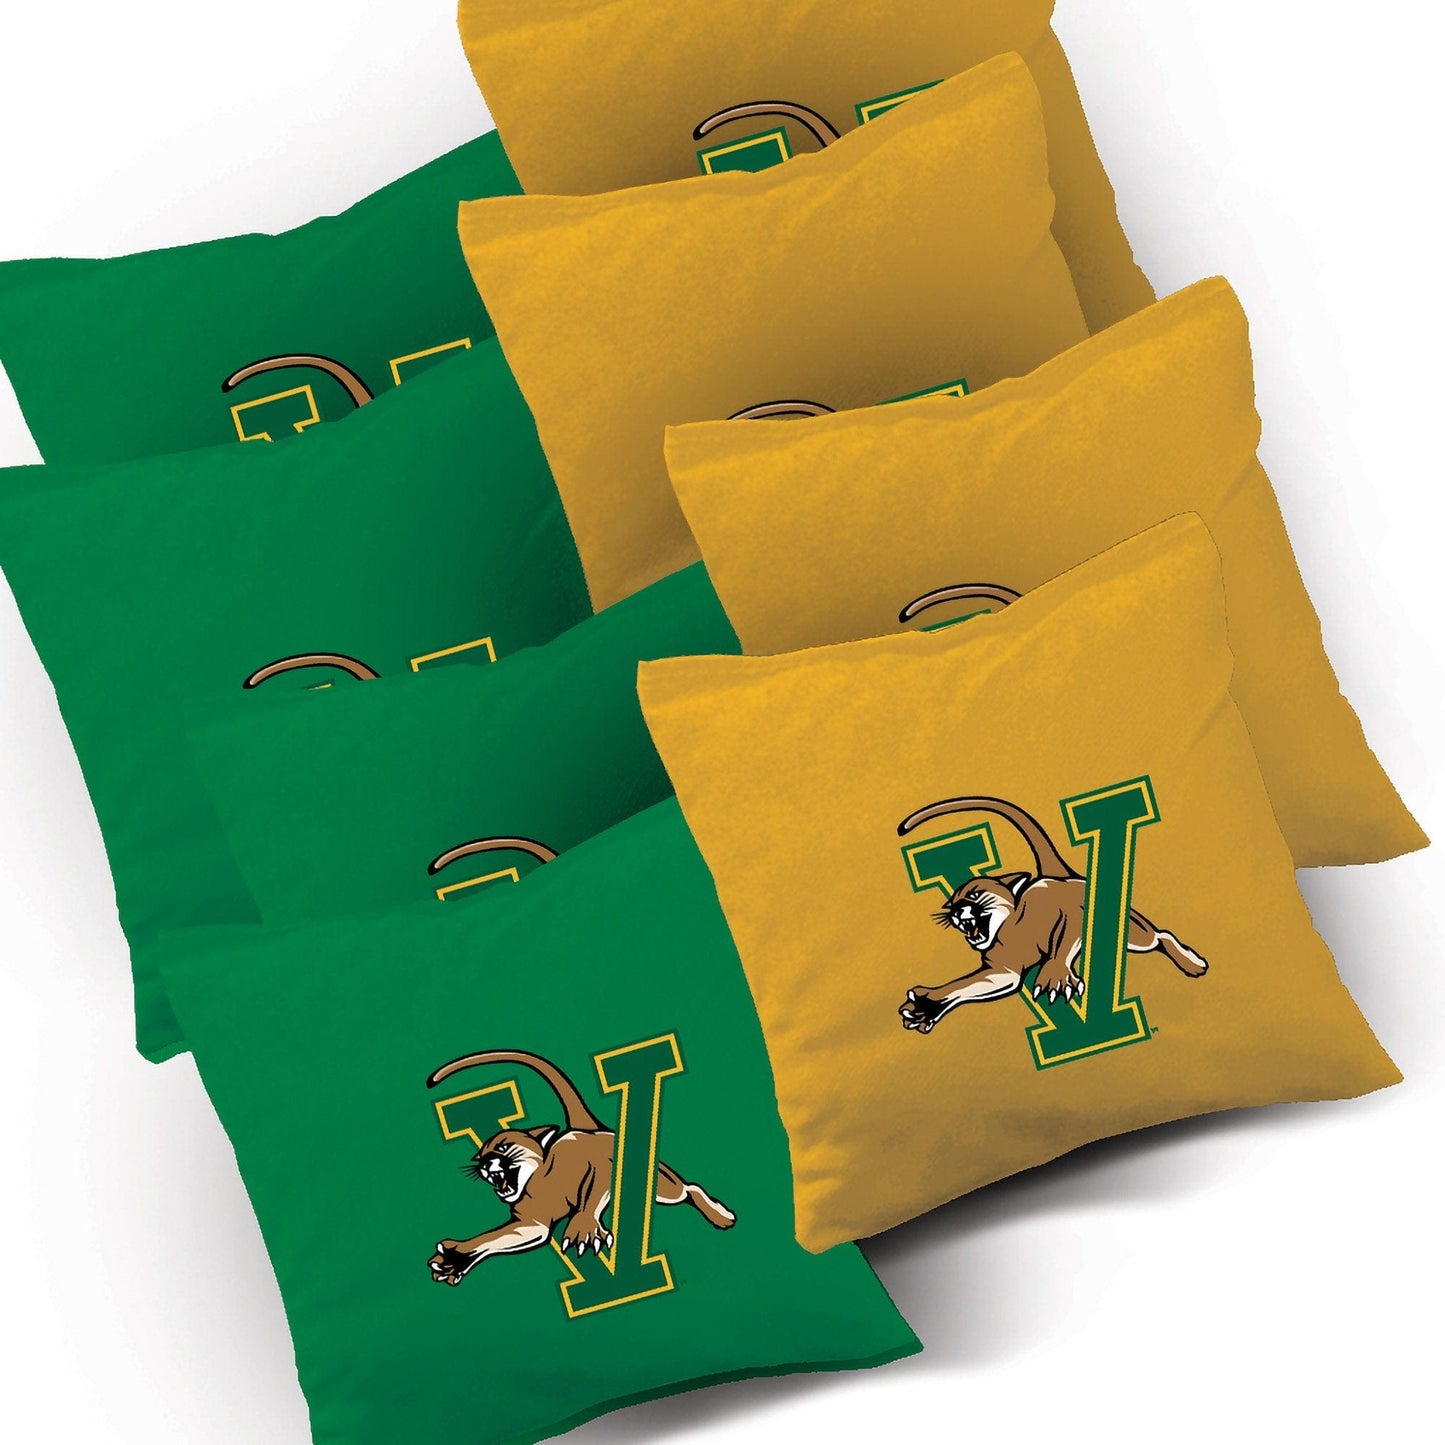 Vermont Catamounts Stained Pyramid team logo corn hole bags